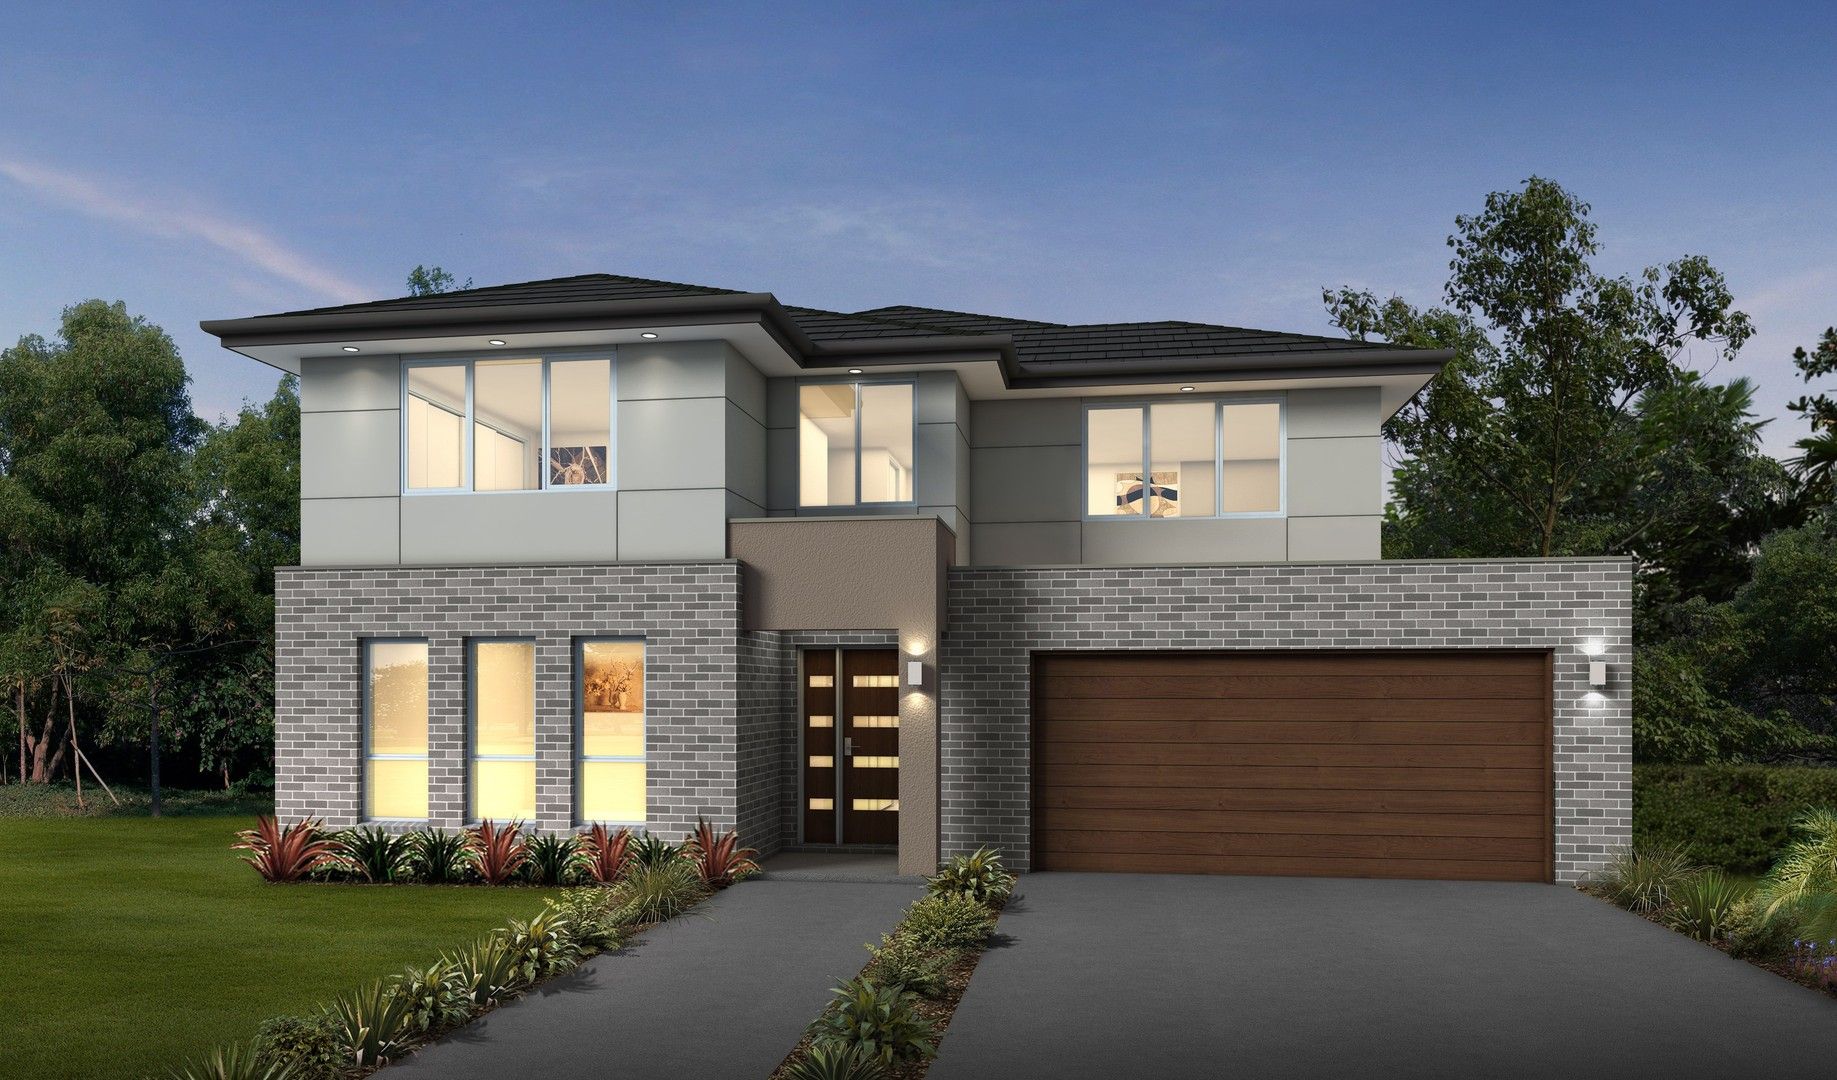 5 bedrooms New House & Land in Lot 27 Rinnana Place ST GEORGES BASIN NSW, 2540